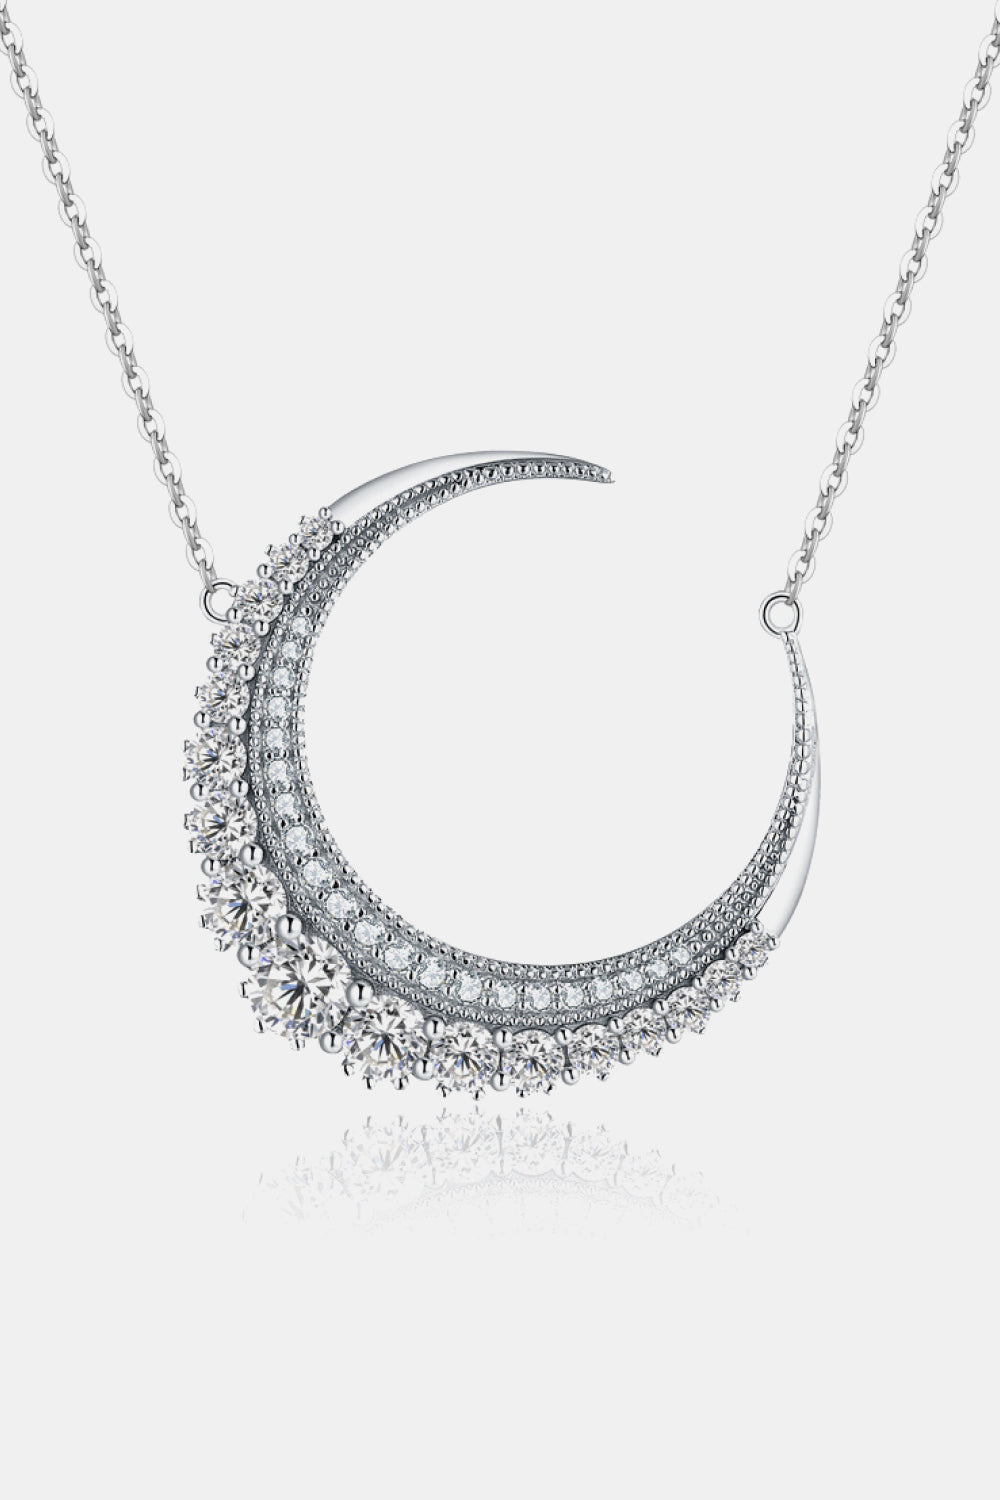 1.8 Carat Moissanite Crescent Moon Shape Pendant Necklace free shipping -Oh Em Gee Boutique